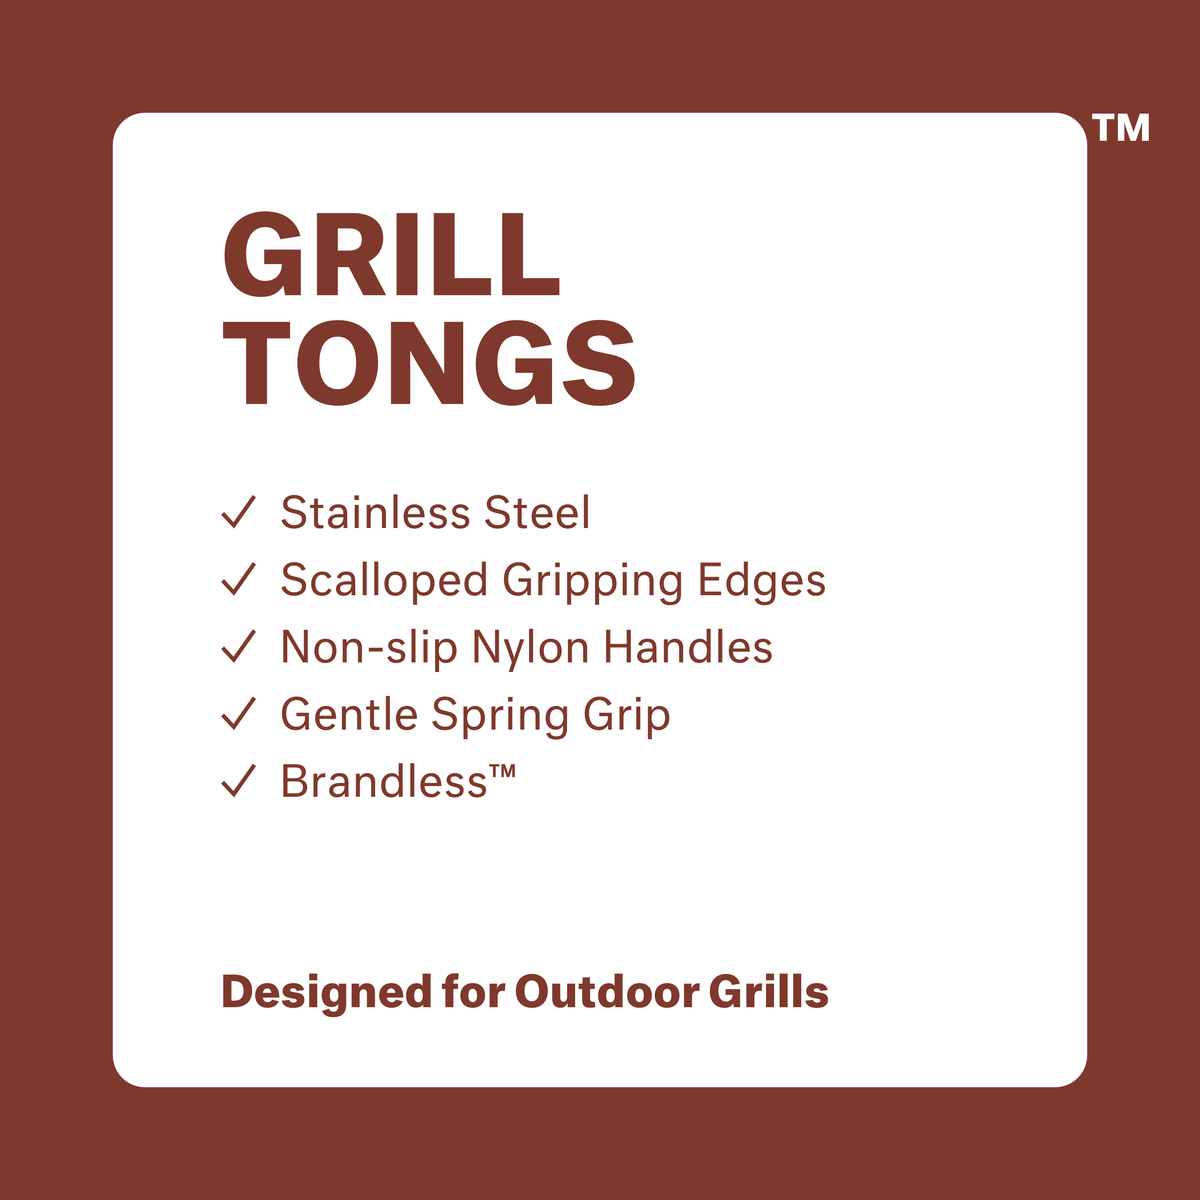 Grill Tongs: stainless steel, scalloped gripping edges, non-slip nylon handles, gengle spring grip, brandless.  Designed for outdoor grills.